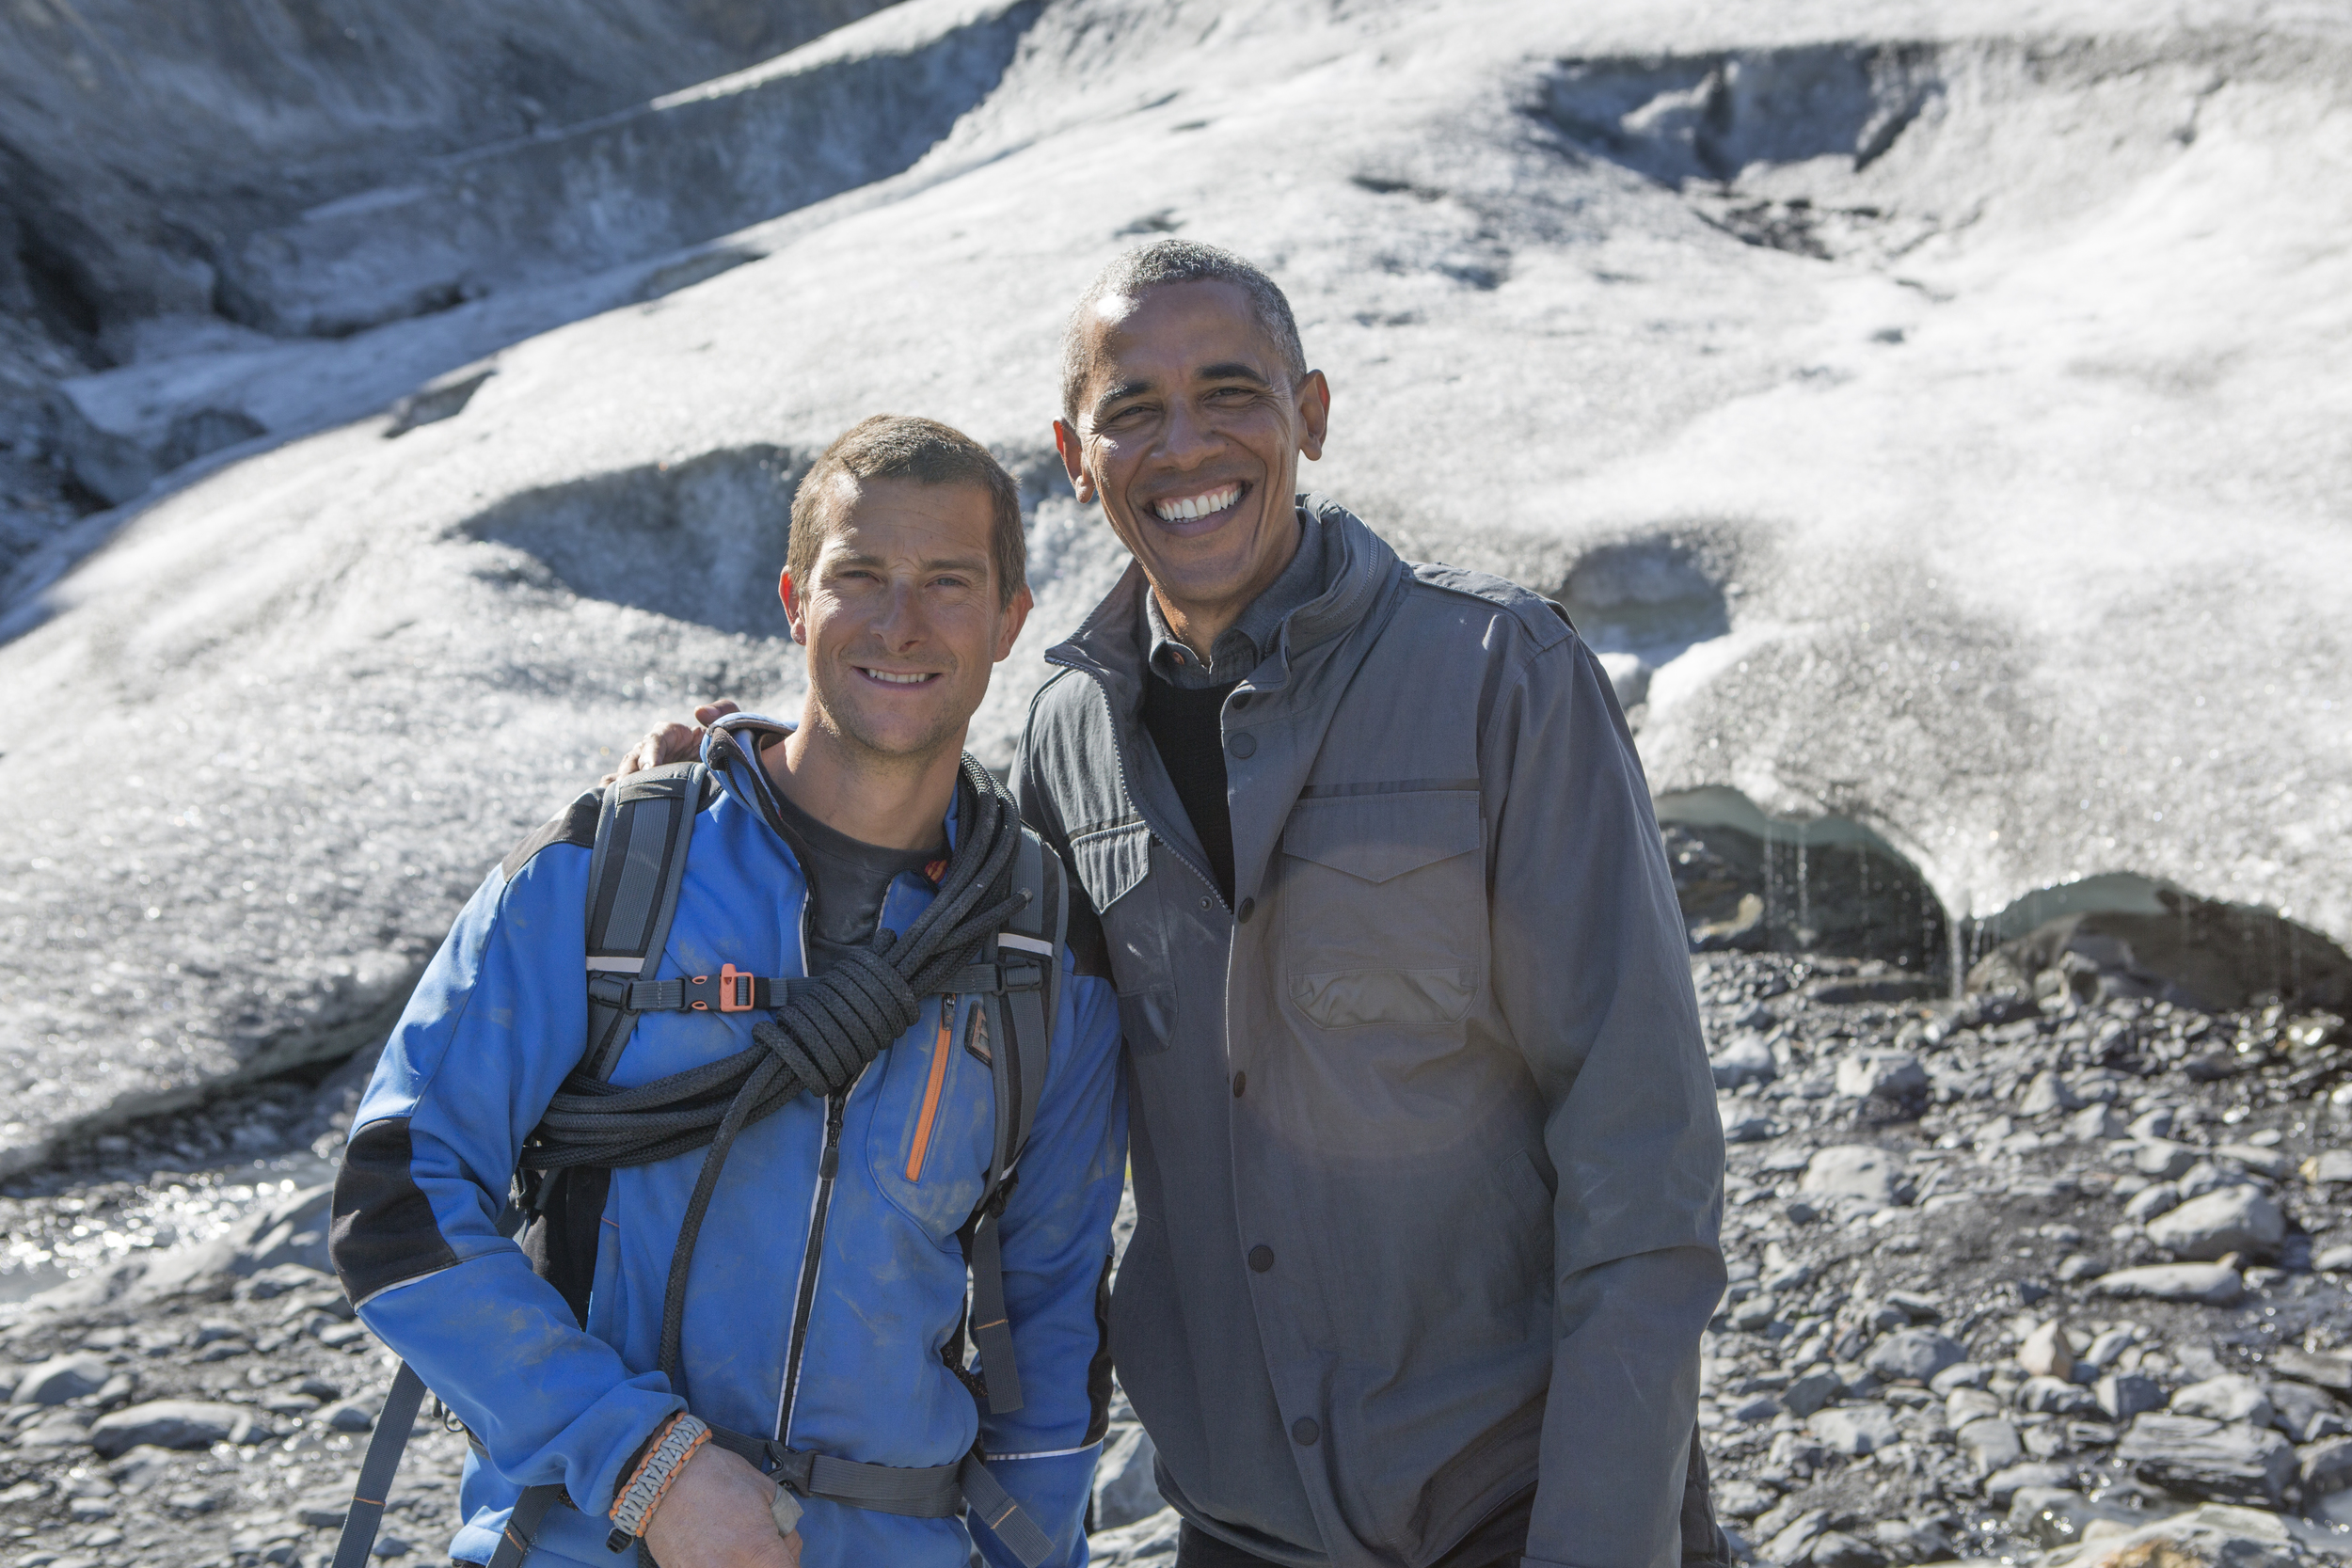   Bear Grylls with President Barack Obama  image - supplied/Discovery 